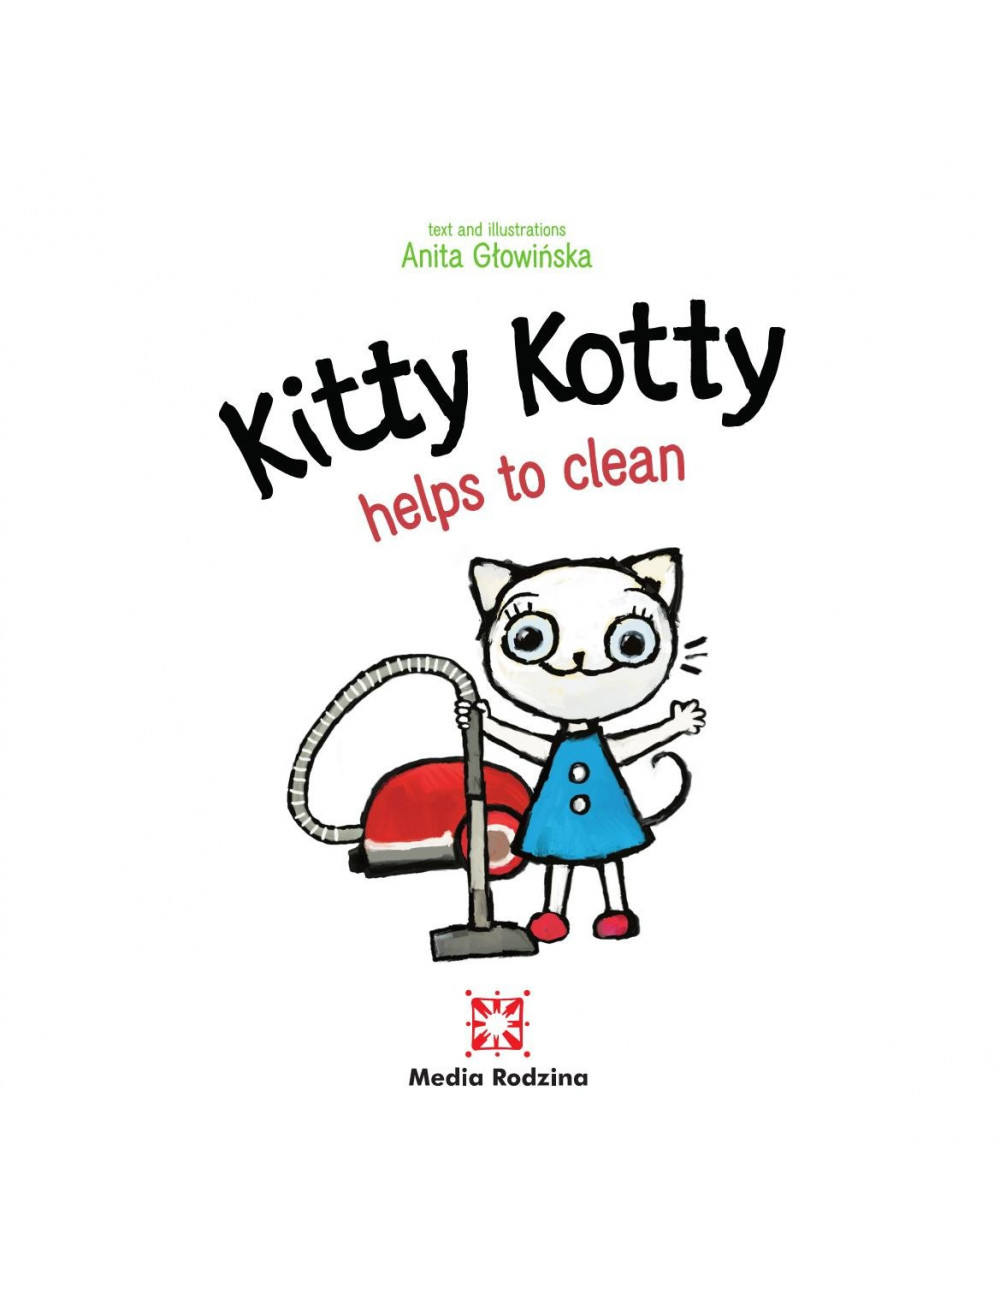 Kitty Kotty helps to clean,...